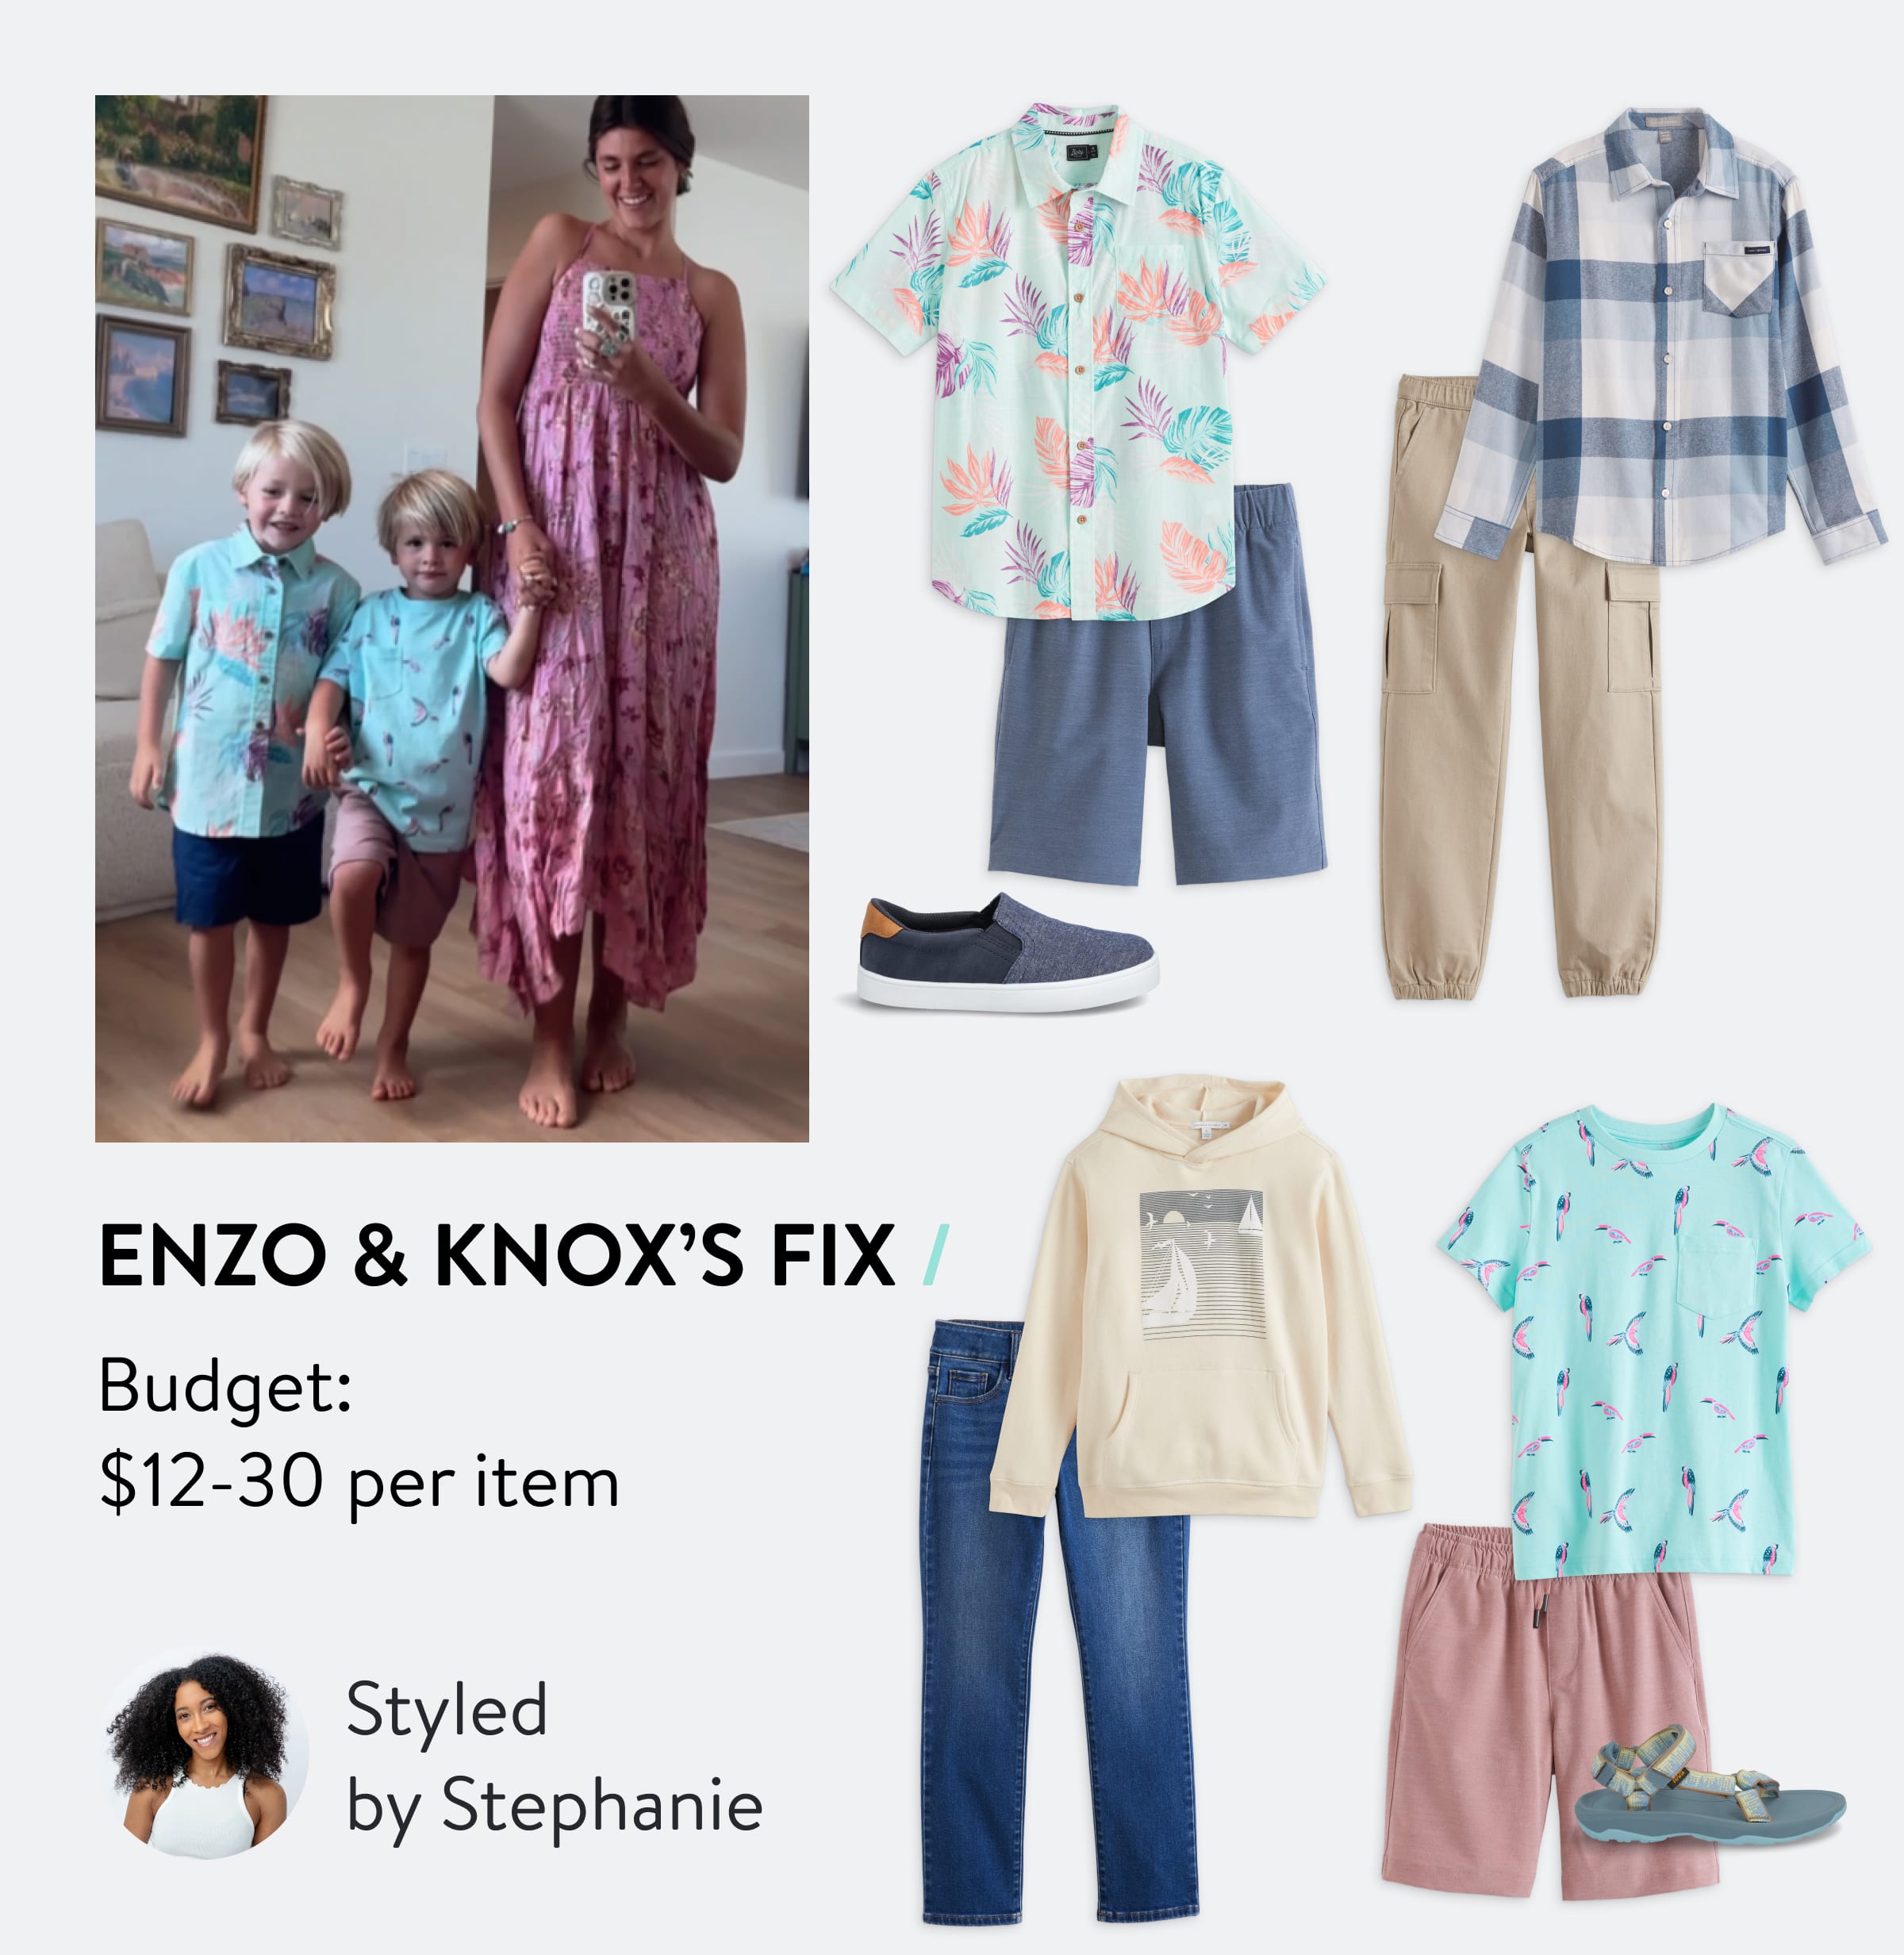 Enzo and Knox’s Fix: Budget $12-30 per item. Styled by Stephanie. Woman wearing Stitch Fix floral dress with two kids wearing Stitch Fix Kids’ clothes including bright shirts and shorts, selection of Stitch Fix Kids outfits with cargo pants, hoodie, kids jeans and kids slip-on sneakers and sandals. Stitch Fix Stylist wearing white tank top.